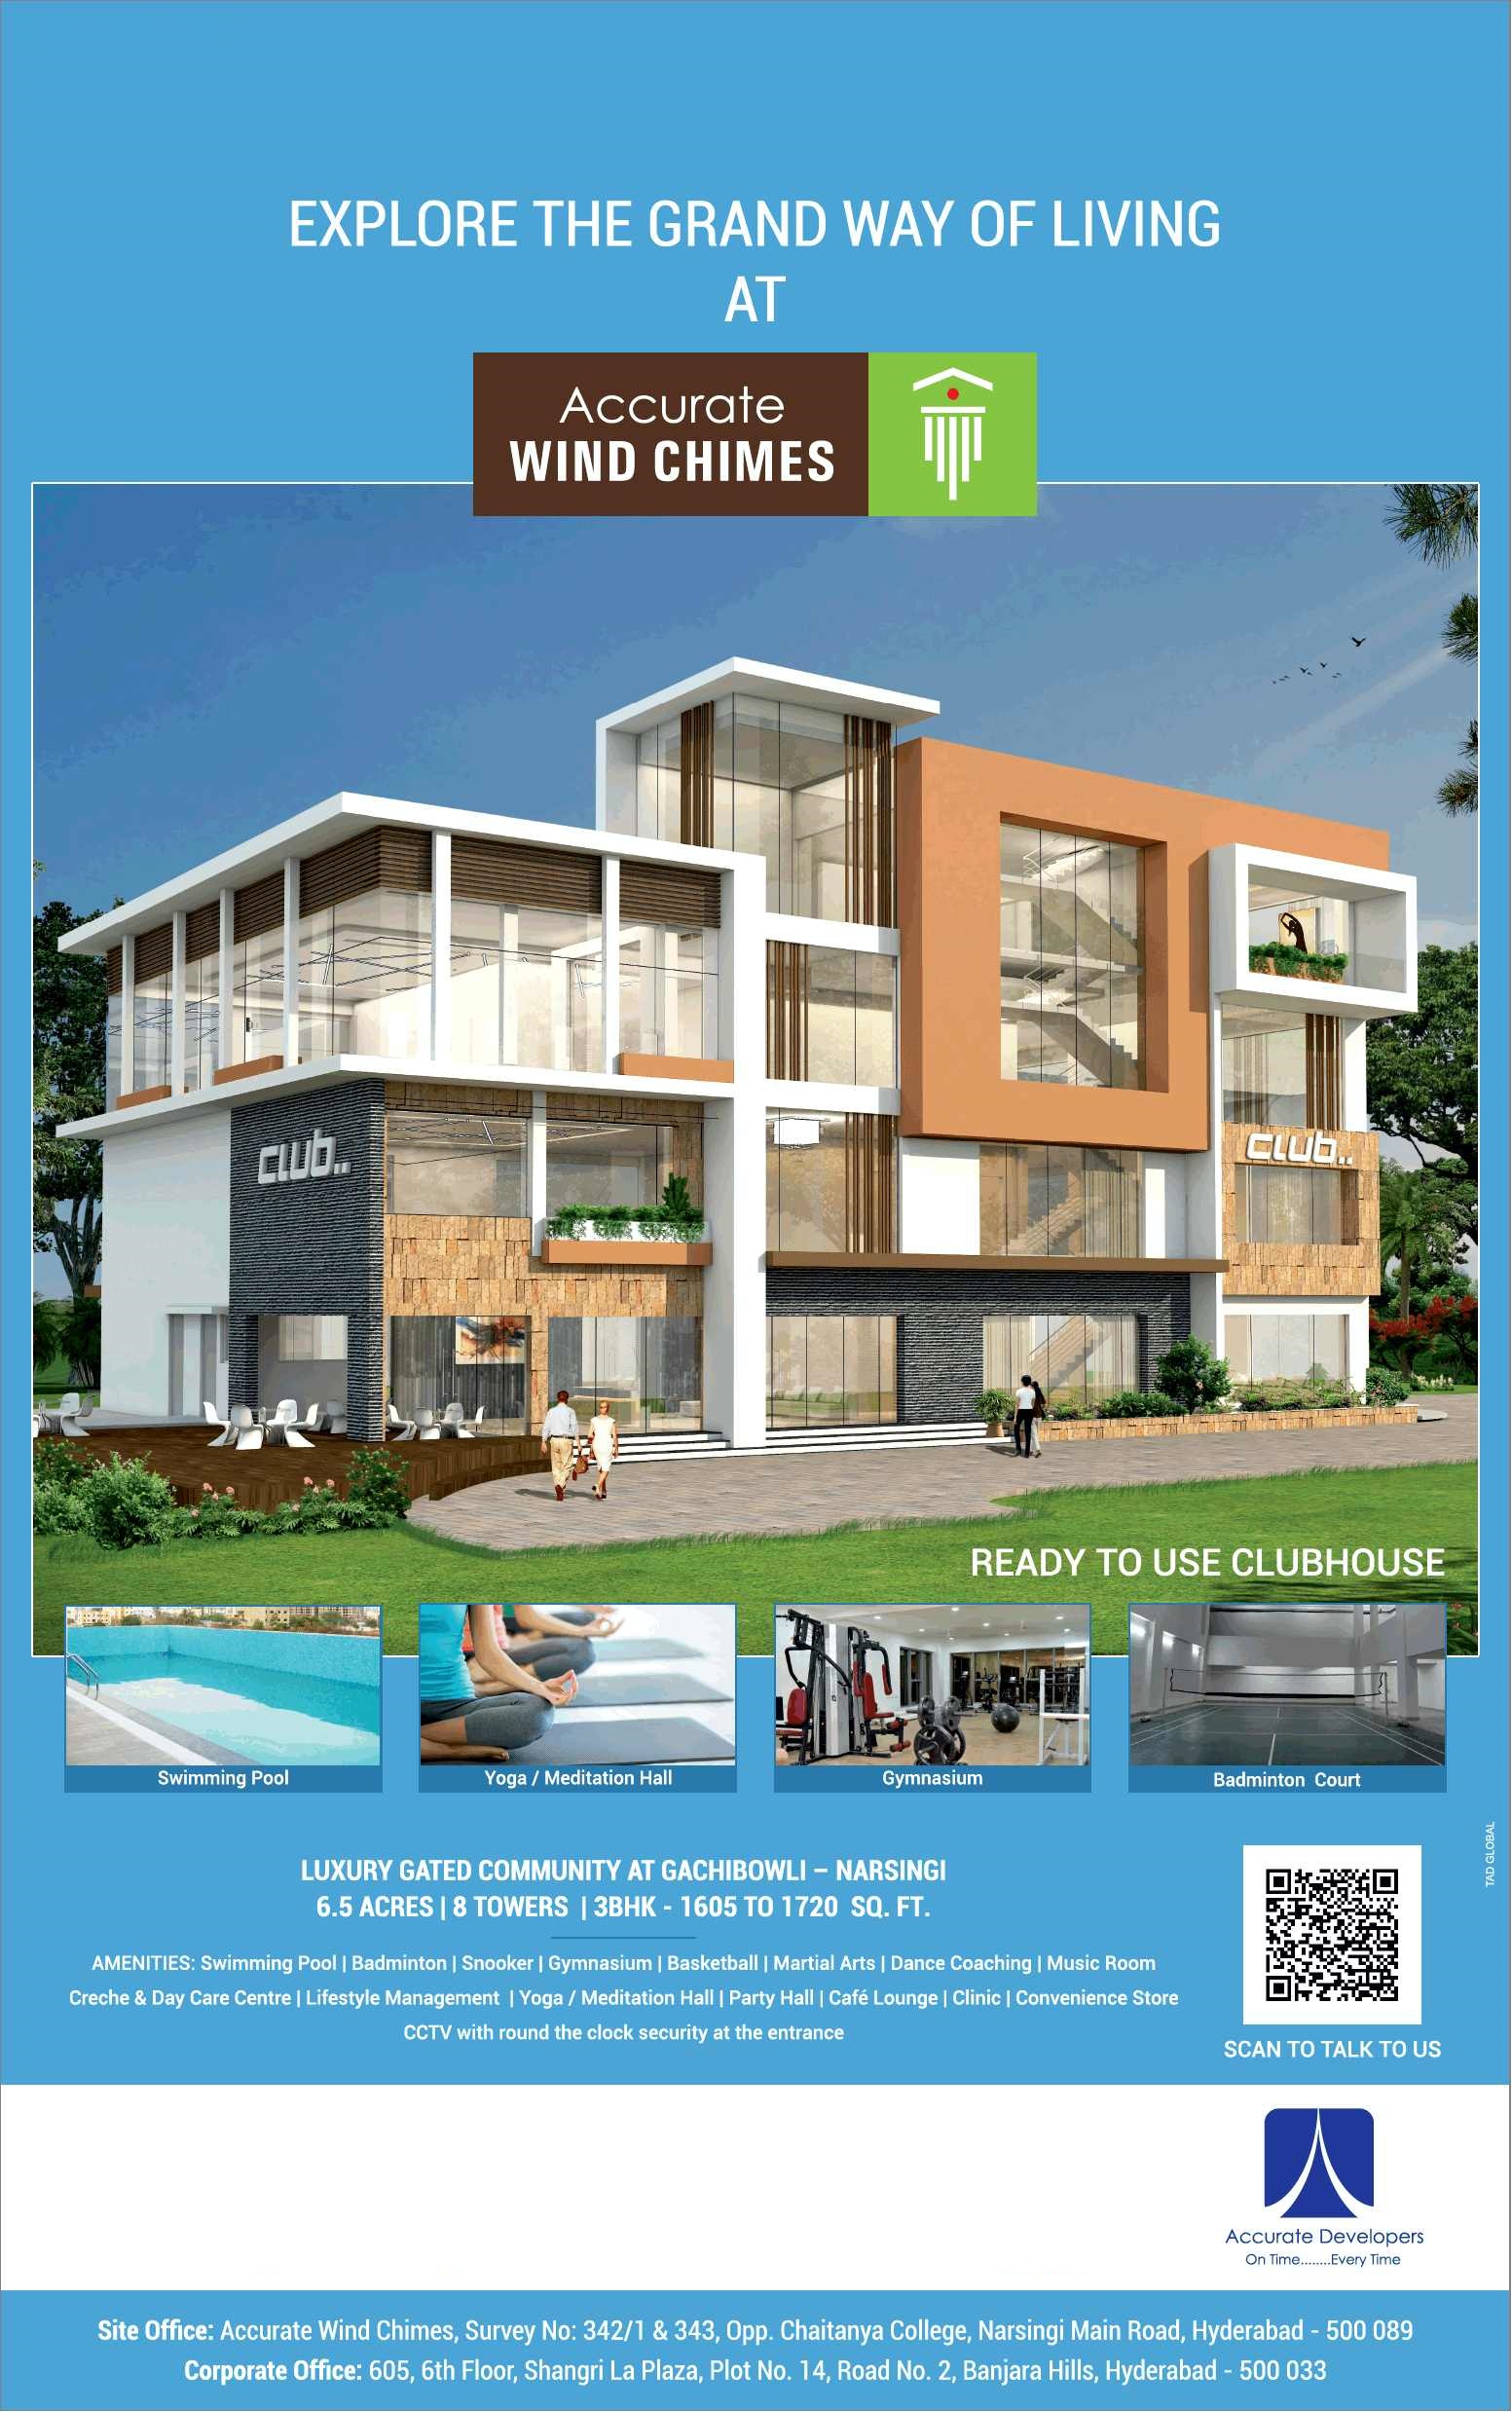 Avail luxury gated community at Accurate Wind Chimes in Gachibowli, Hyderabad Update